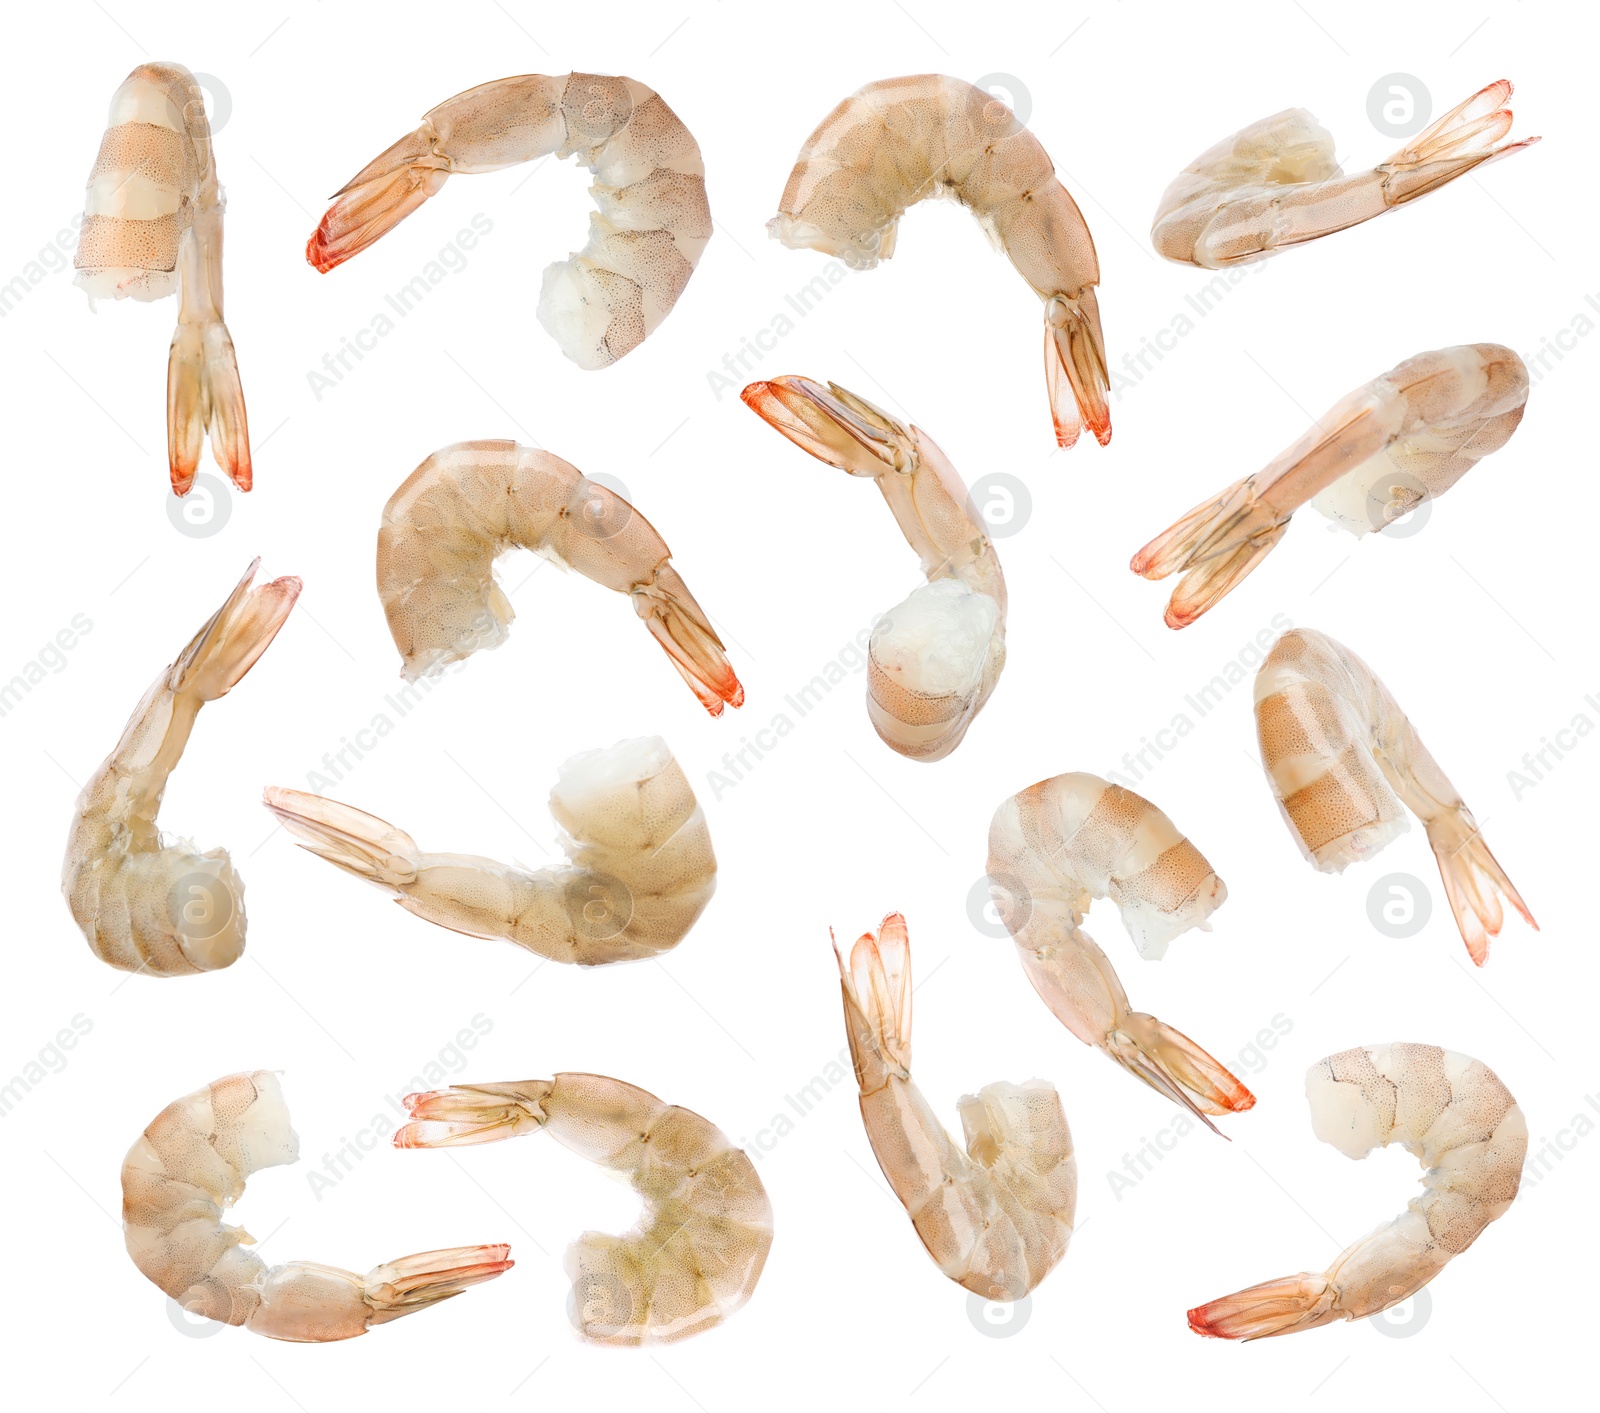 Image of Collage of raw shrimps on white background